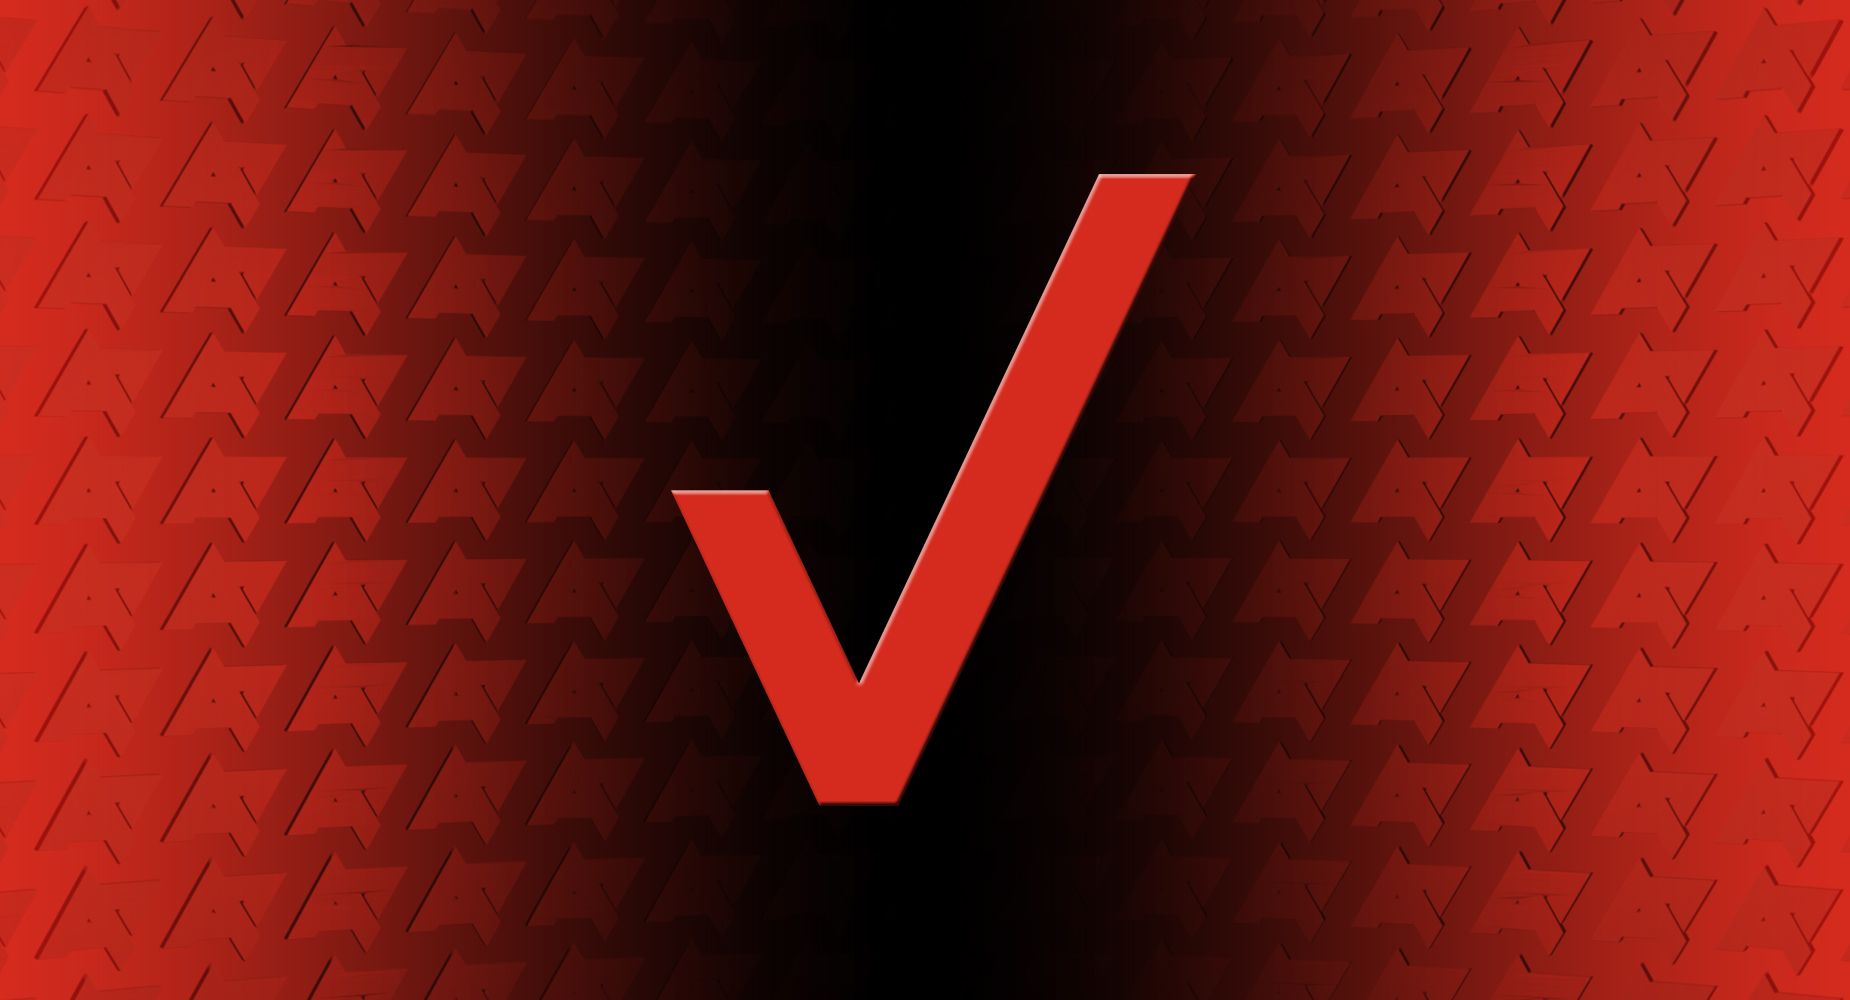 A red "V" indicating Verizon against a wall of Android Police logos